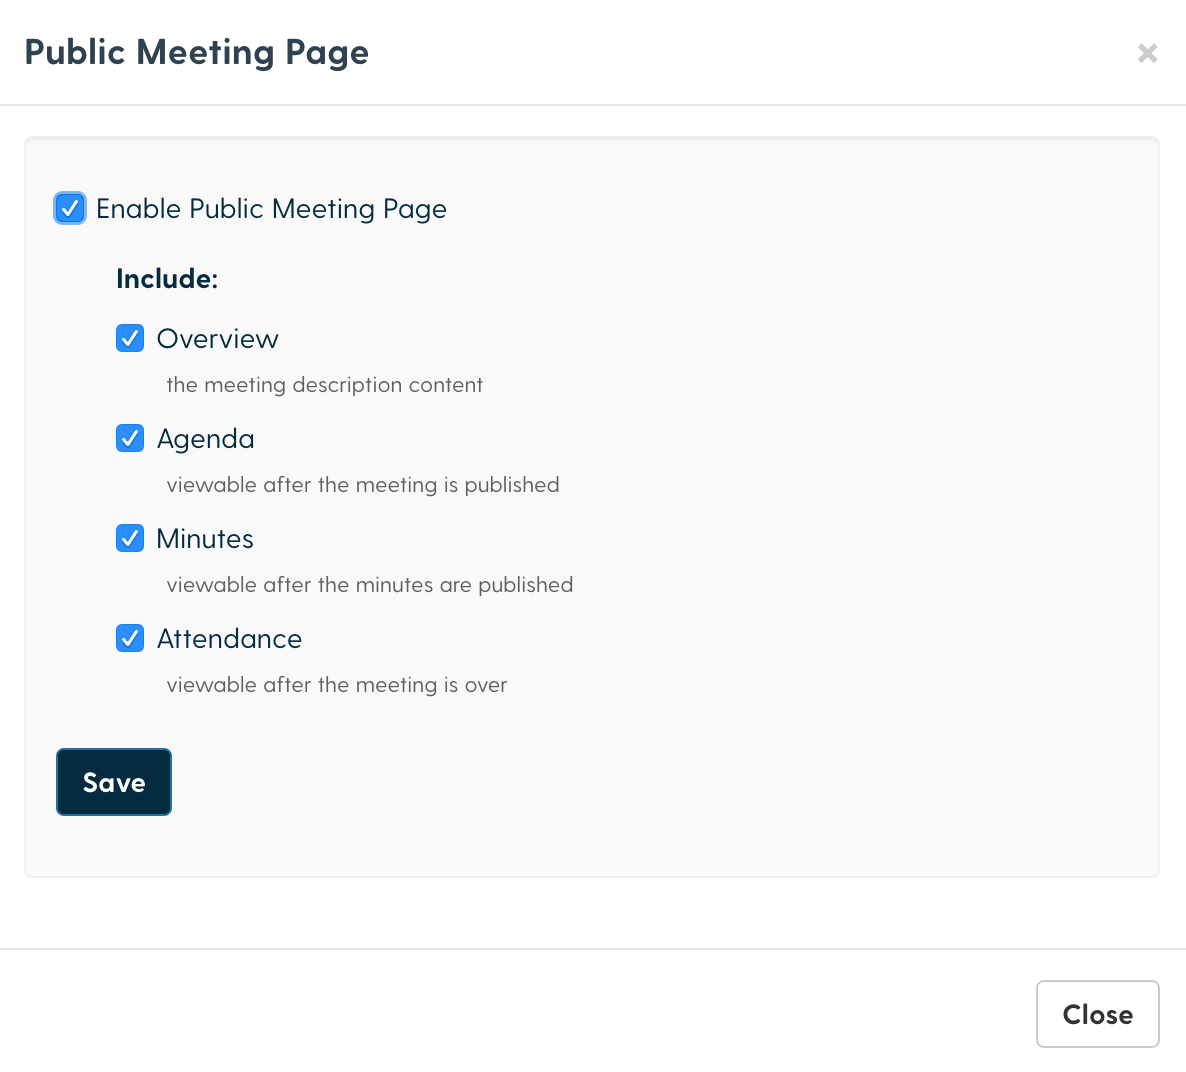 With the Public Meeting Pages feature in Boardable allows you to make meeting details public.